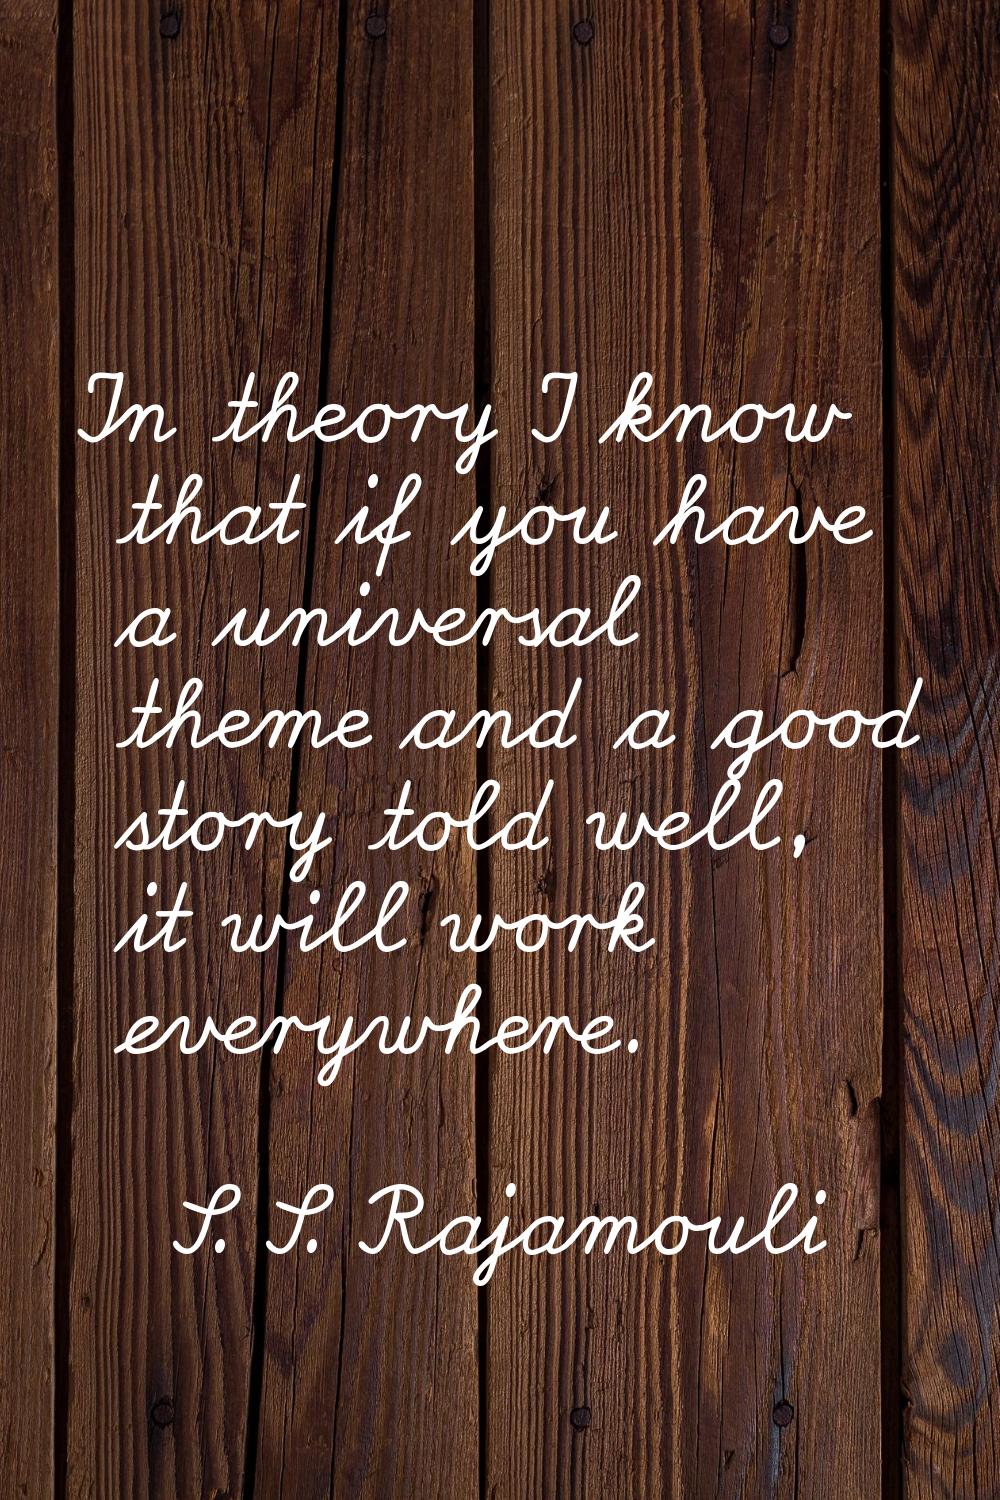 In theory I know that if you have a universal theme and a good story told well, it will work everyw